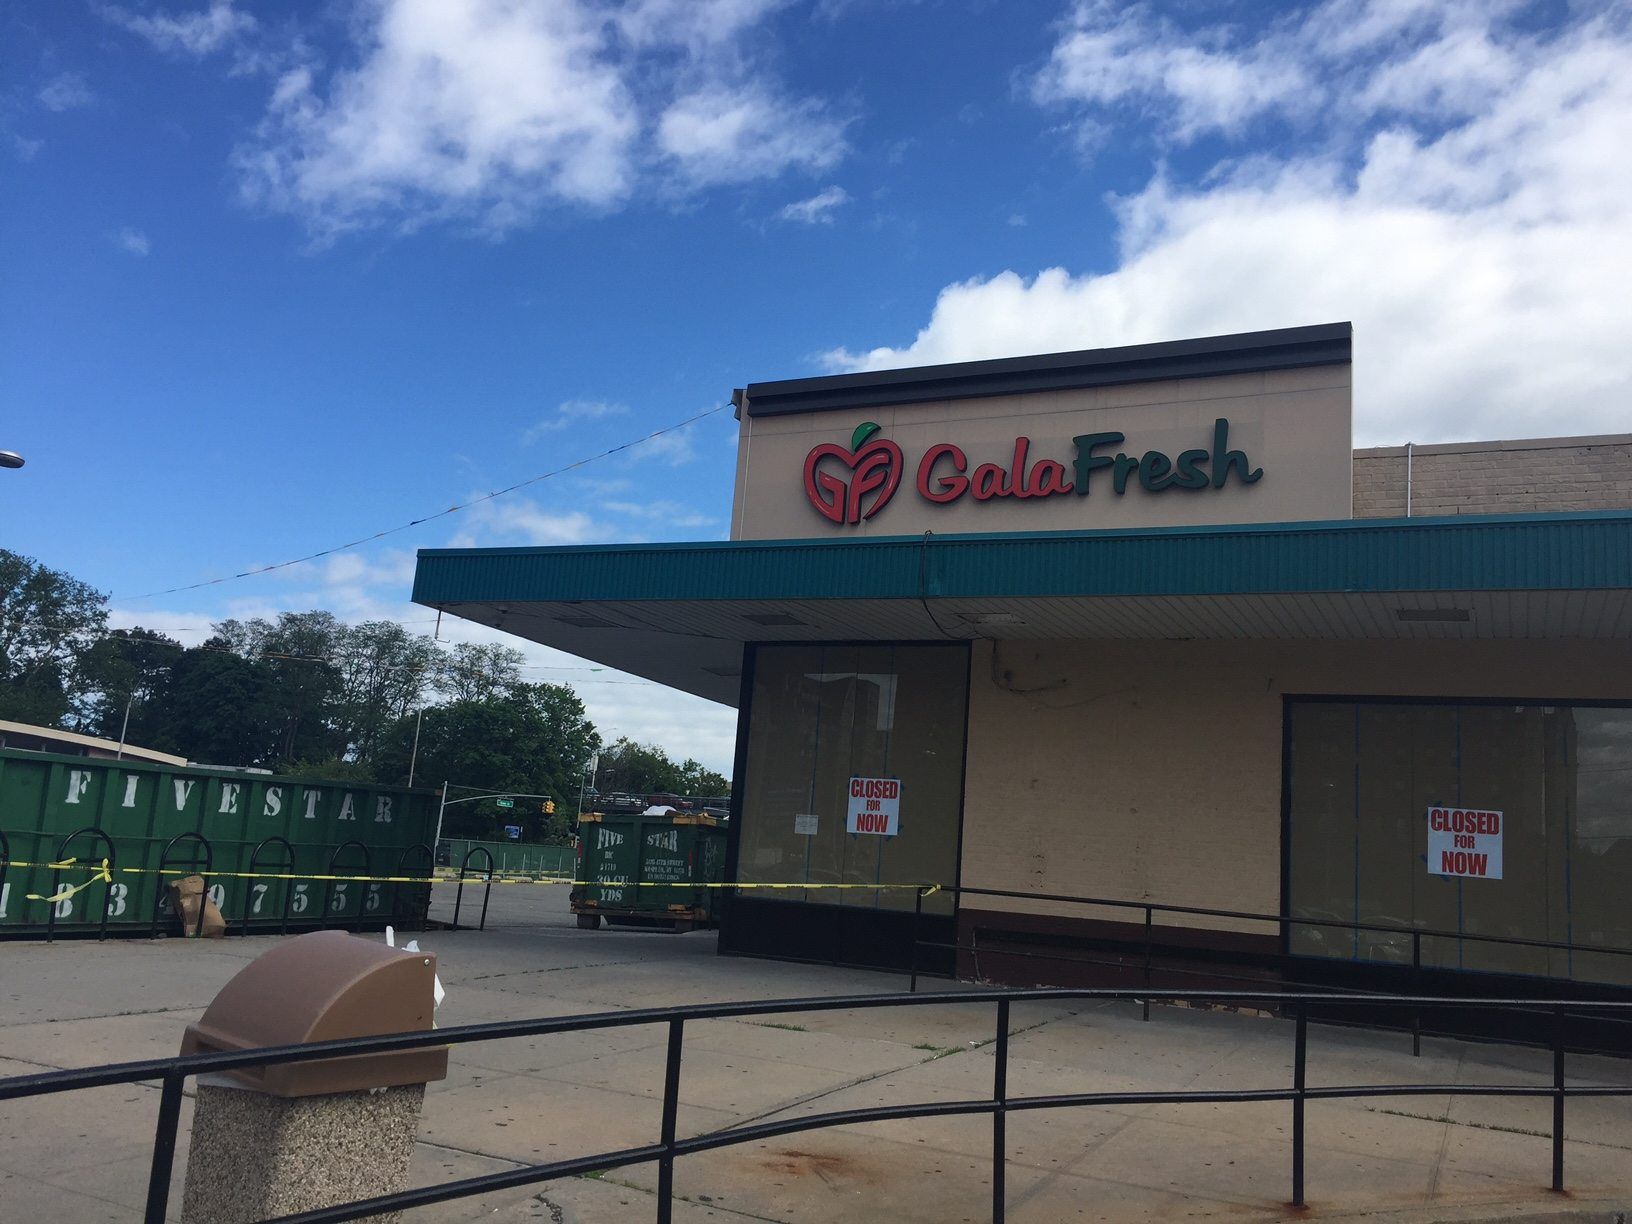 Gala Fresh Farms Will Likely Become NetCost Market, Property Records Show